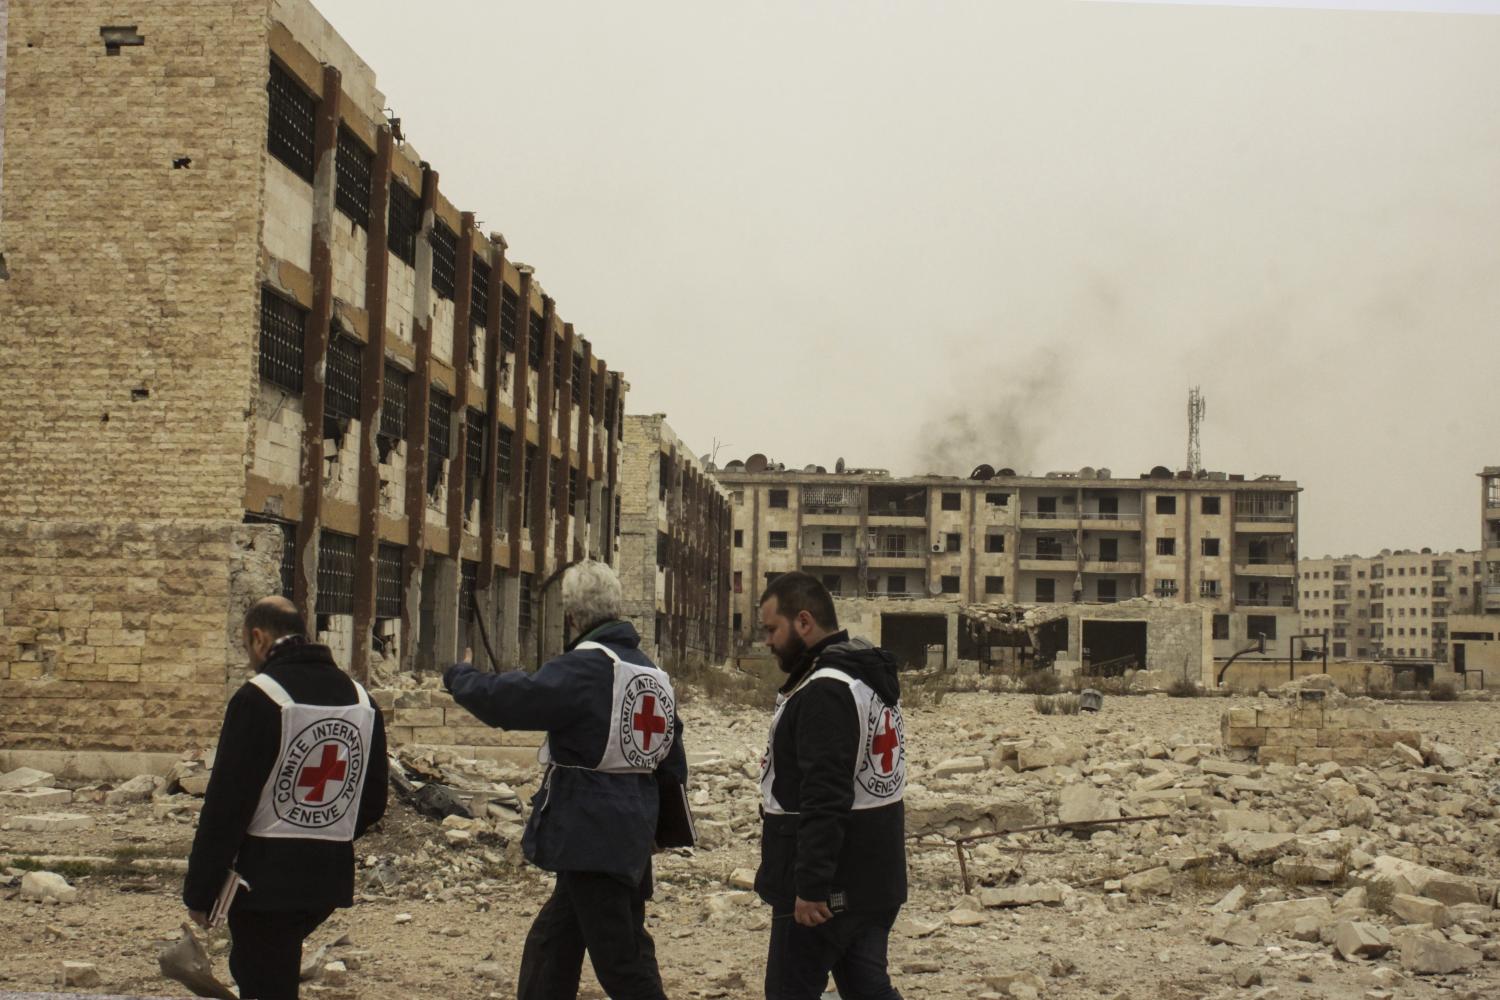 Three International Committee Red Cross members evaluate the rubble of a conflict-affected area in Syria. They were checking the living conditions
in order to determine when civilians can live there again. Despite taking no part, millions of innocent civilians face the consequences of the war,
with hundreds of thousands of casualties, and many more seeking safety and becoming refugees.